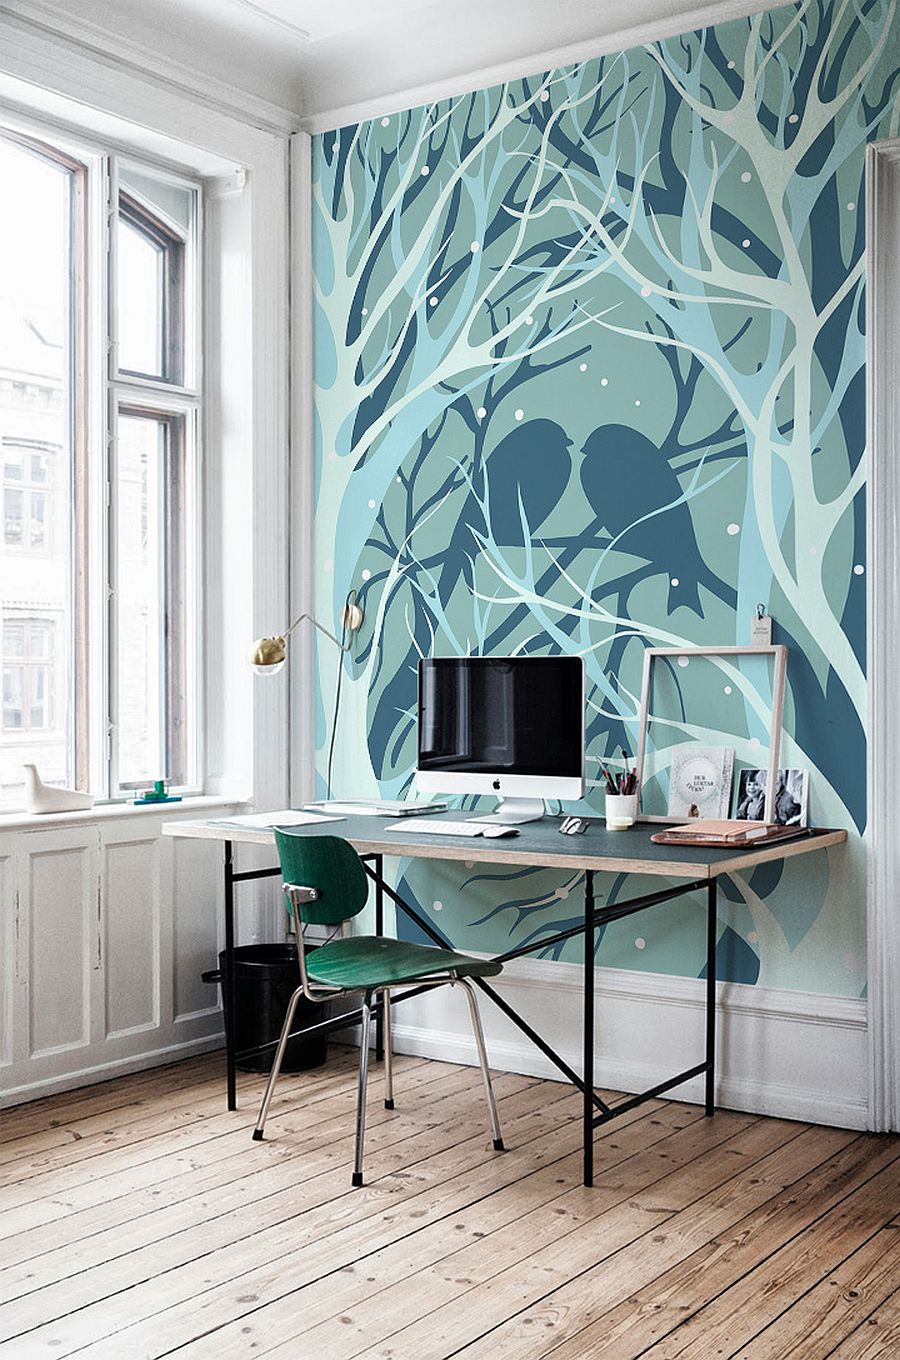 40-the-most-incredible-wall-murals-designs (26)